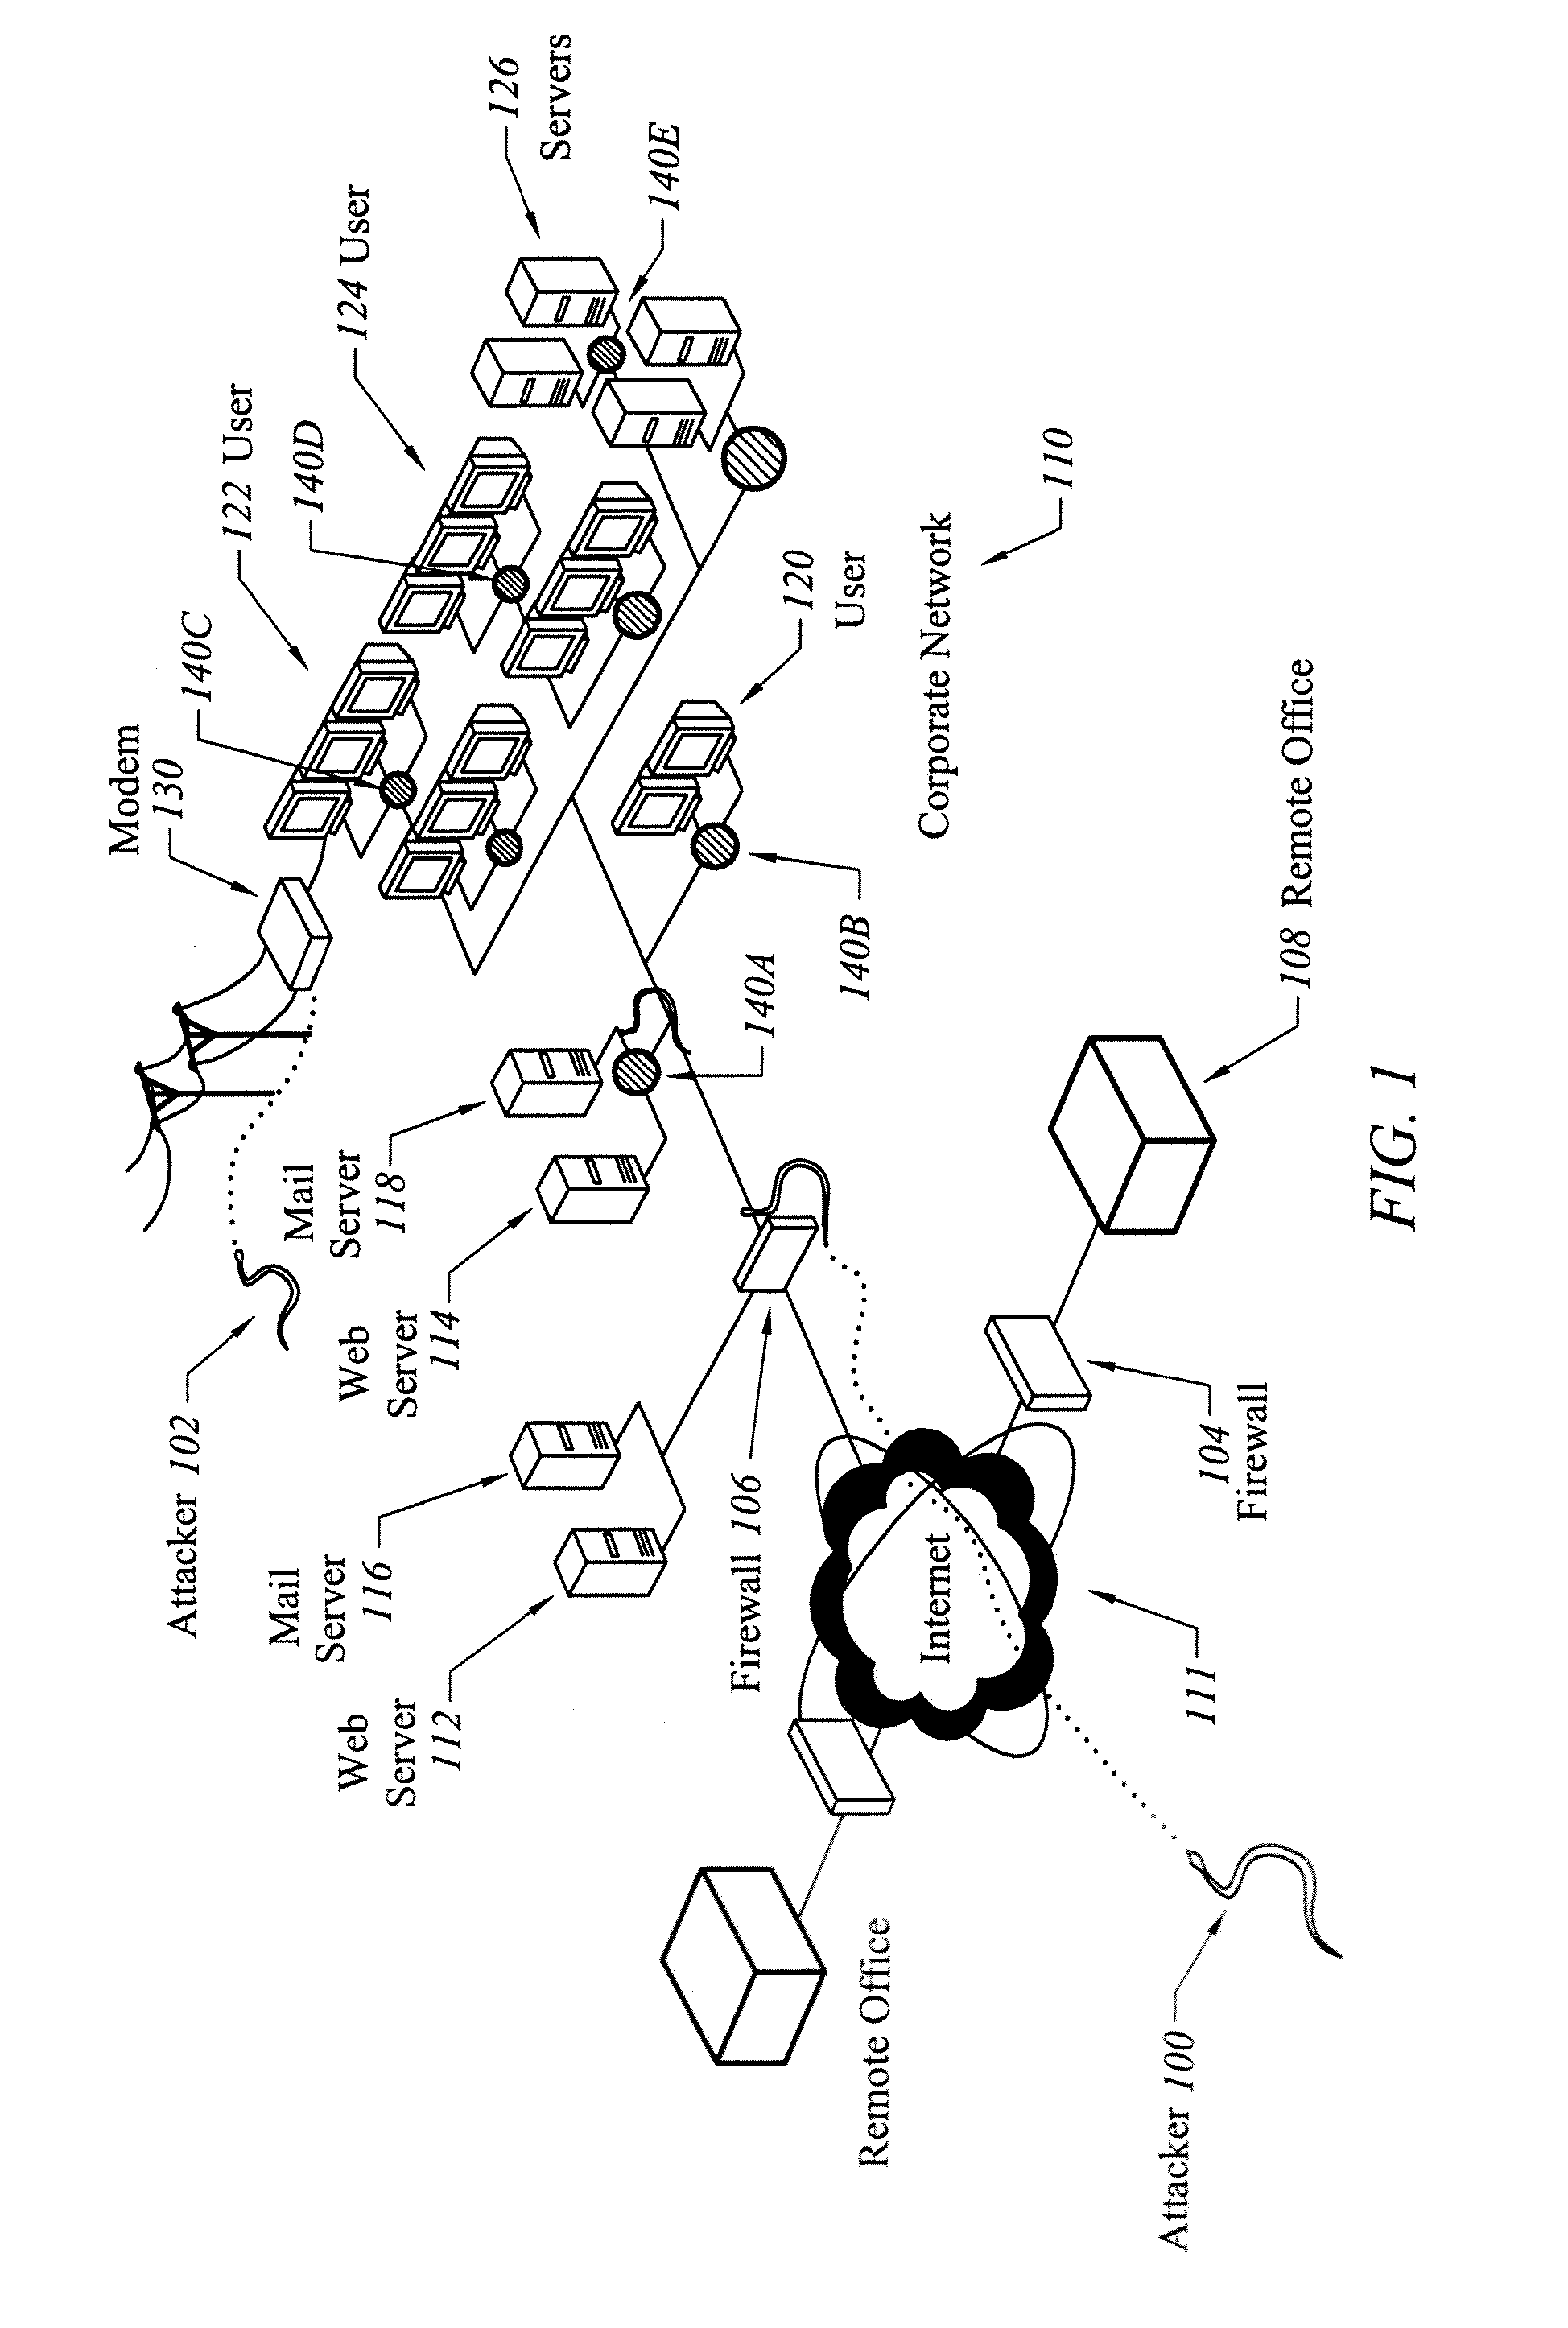 Apparatus and method for selective mirroring